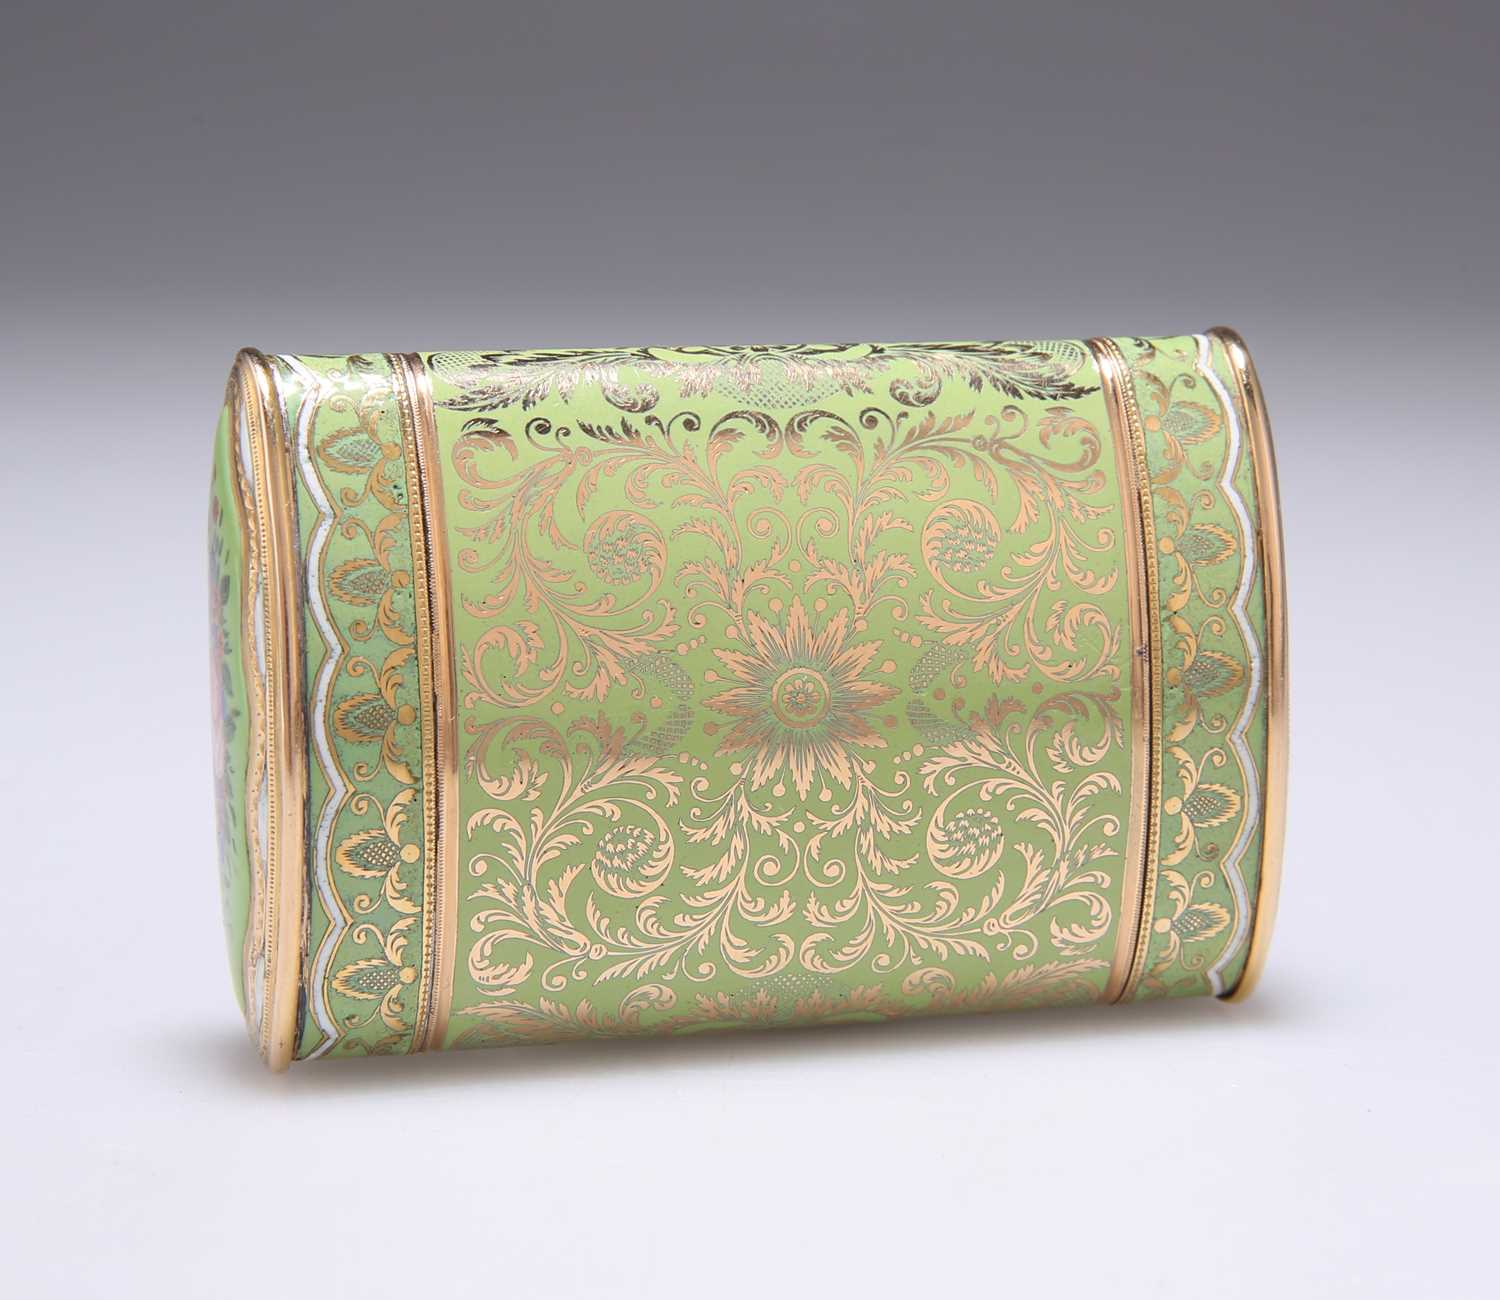 A FINE GOLD AND ENAMEL SNUFF BOX FOR THE TURKISH MARKET by Moulinié Bautte & Cie, Geneva, circa 1810 - Image 2 of 4